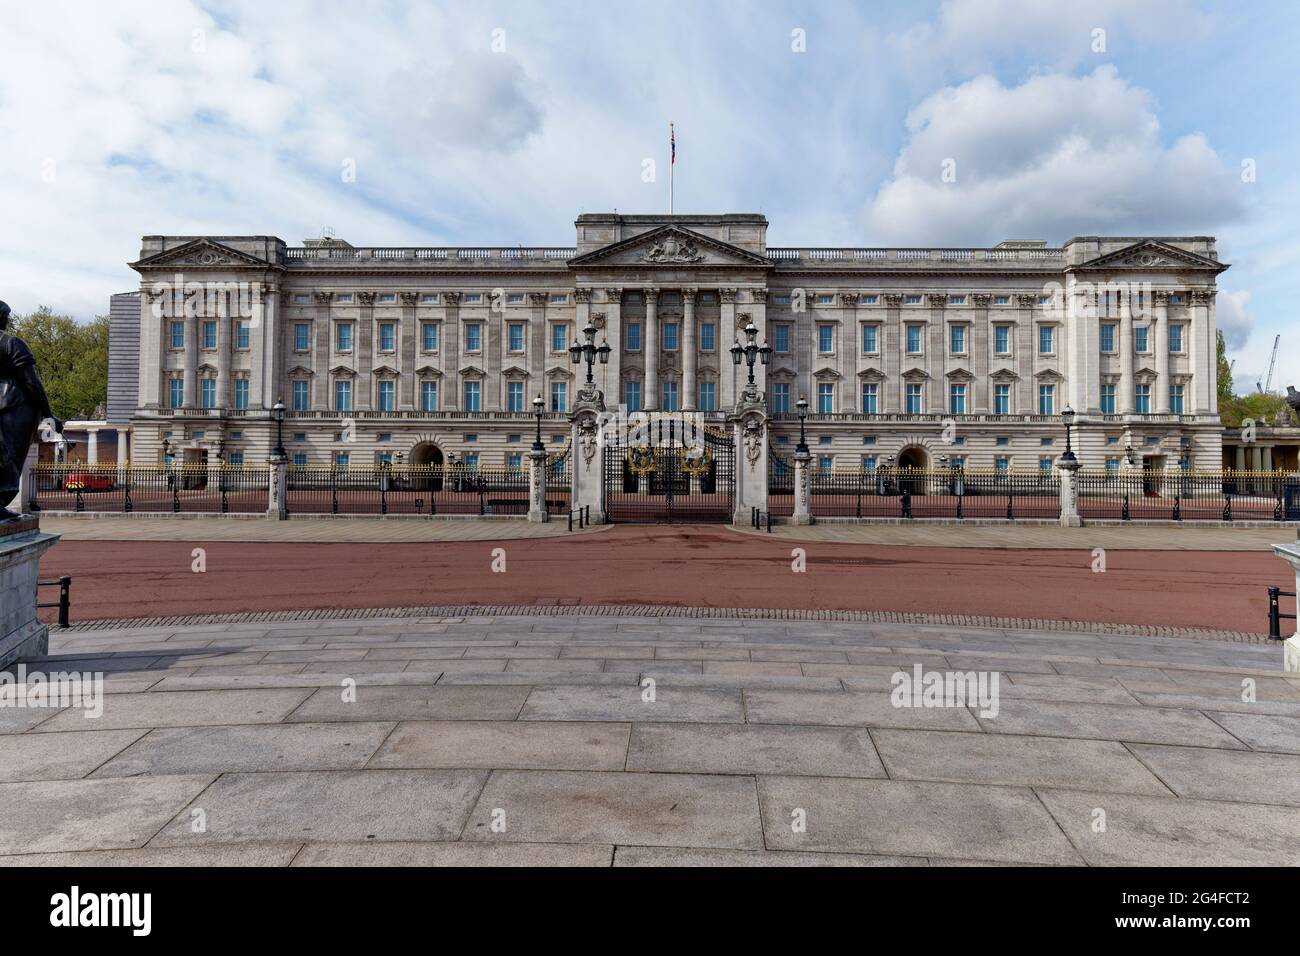 Buckingham Palace, the Royal Residence of the Queen of the United Kingdom sits at one end of The Mall in central London Stock Photo